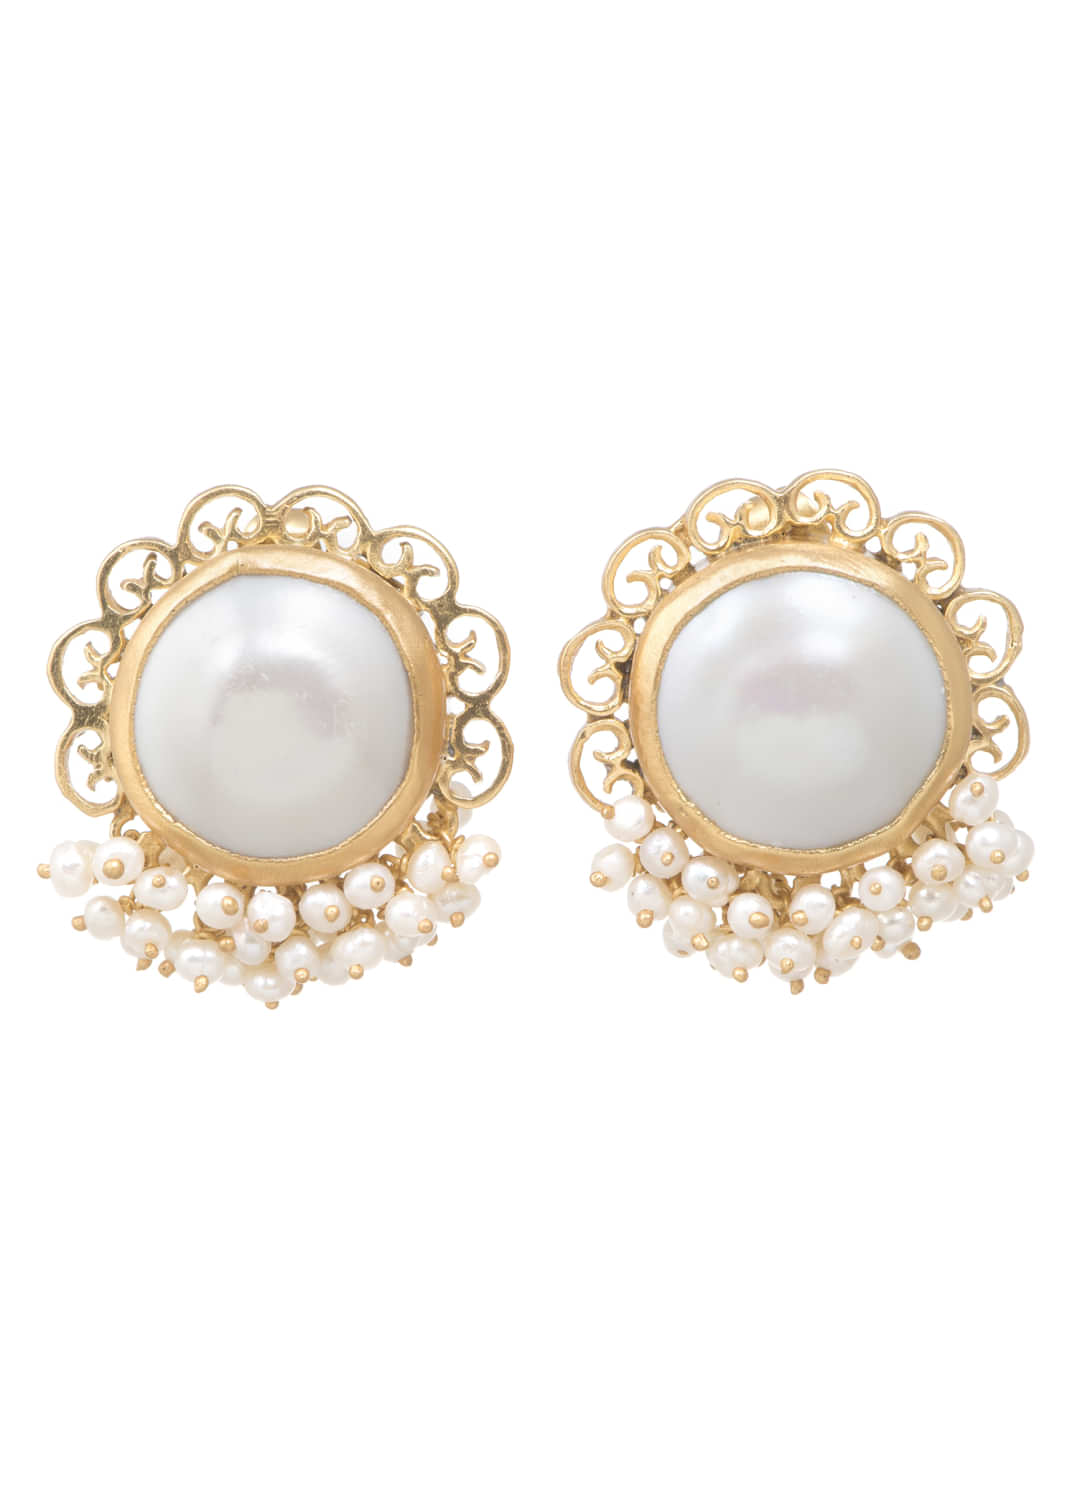 Gold Plated Studs With Baroque Pearls Edged In Filigree Design And Pearls By Zariin